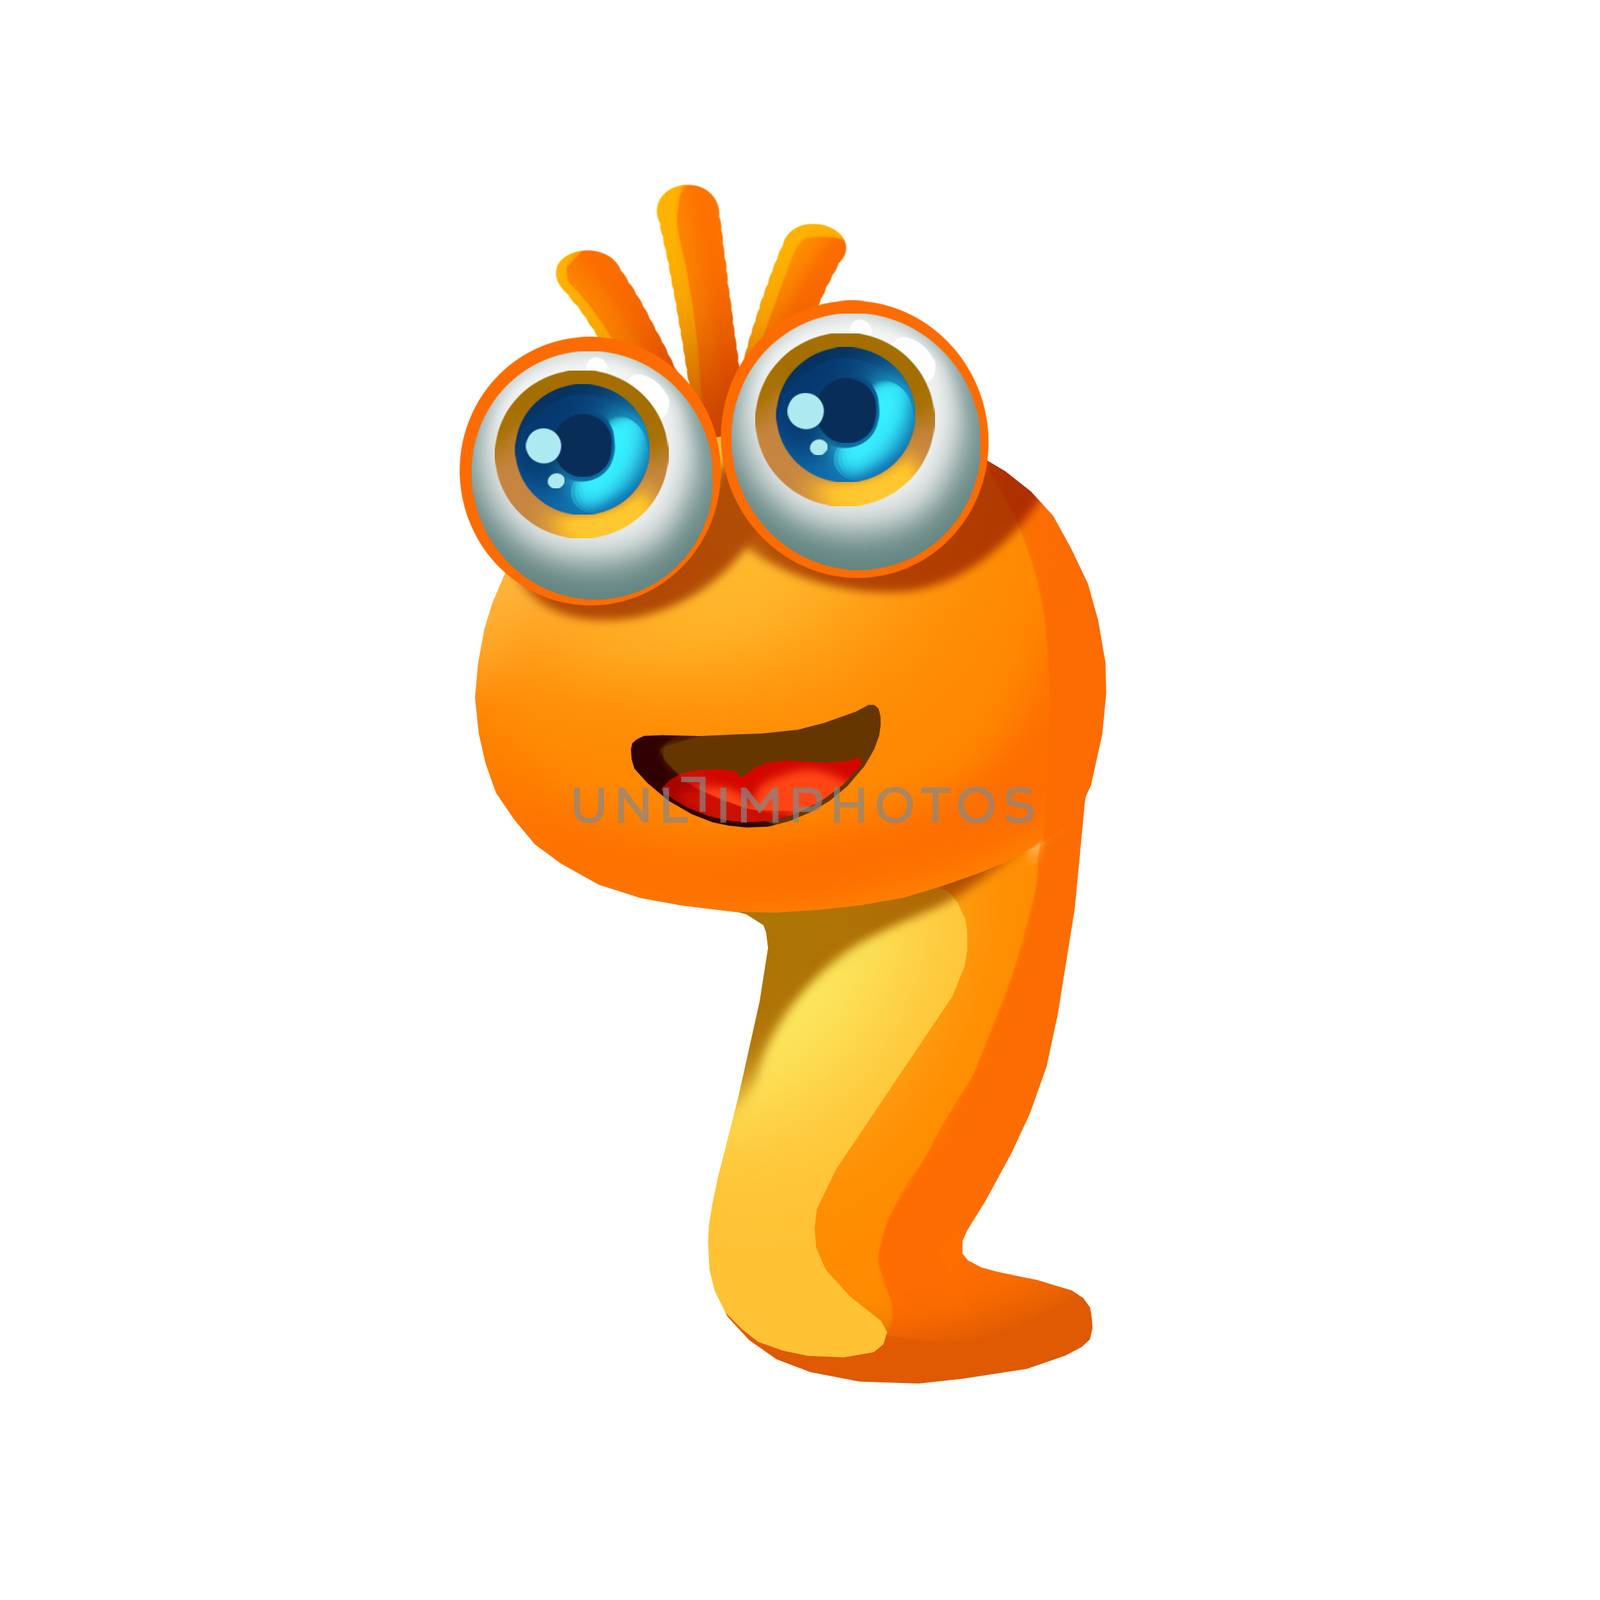 Illustration: Worm. Fantastic Cartoon Style Animal or Game Character Design.